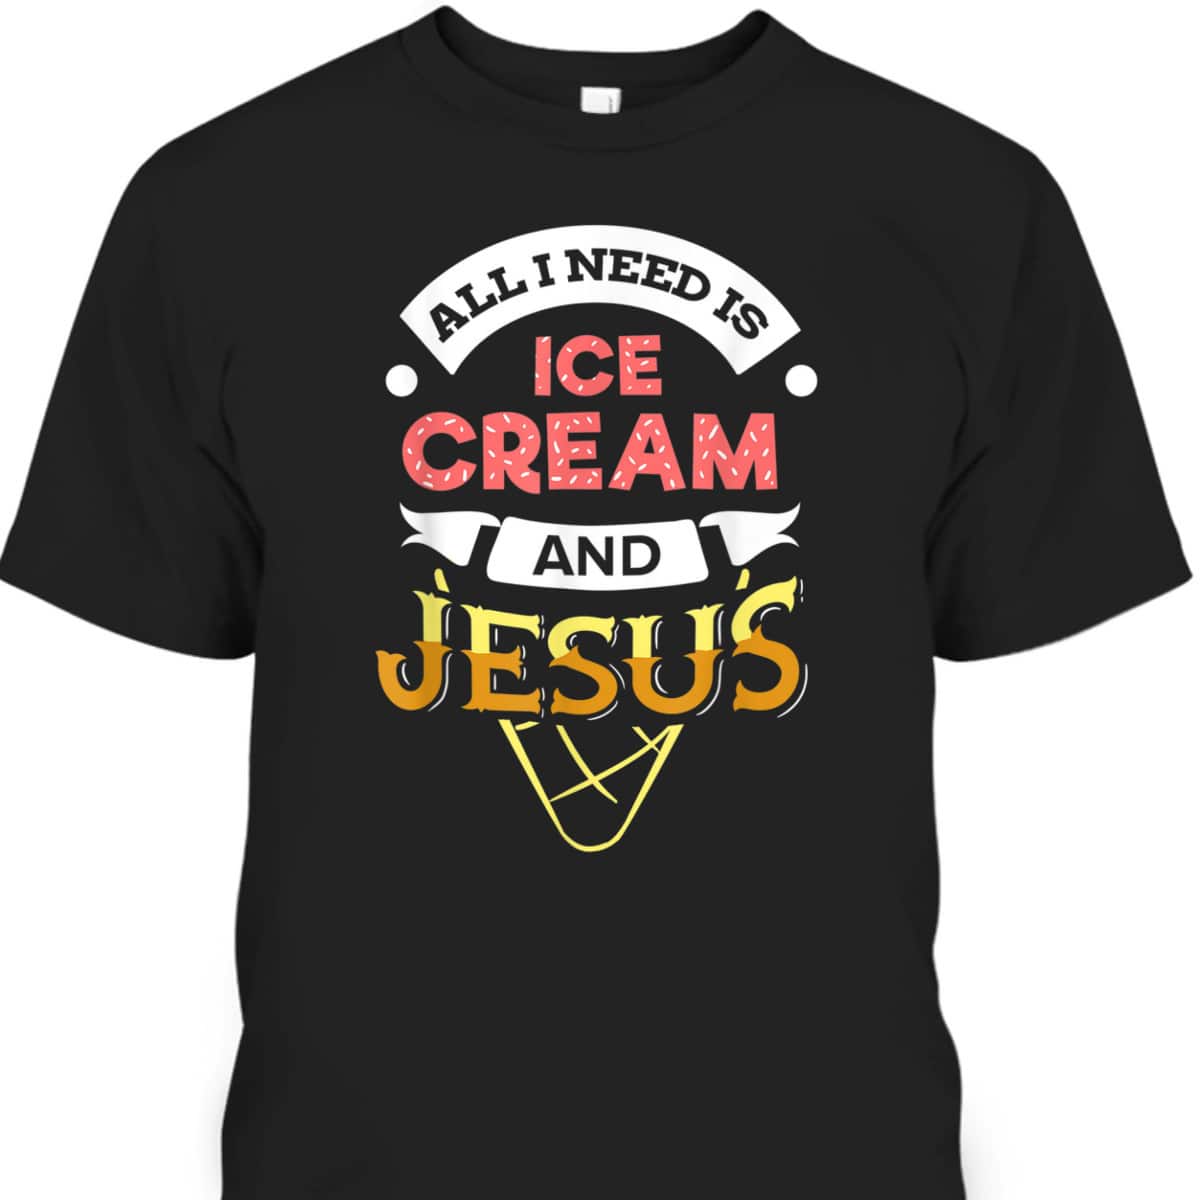 All I Need Is Ice Cream And Jesus Christian God Religious T-Shirt